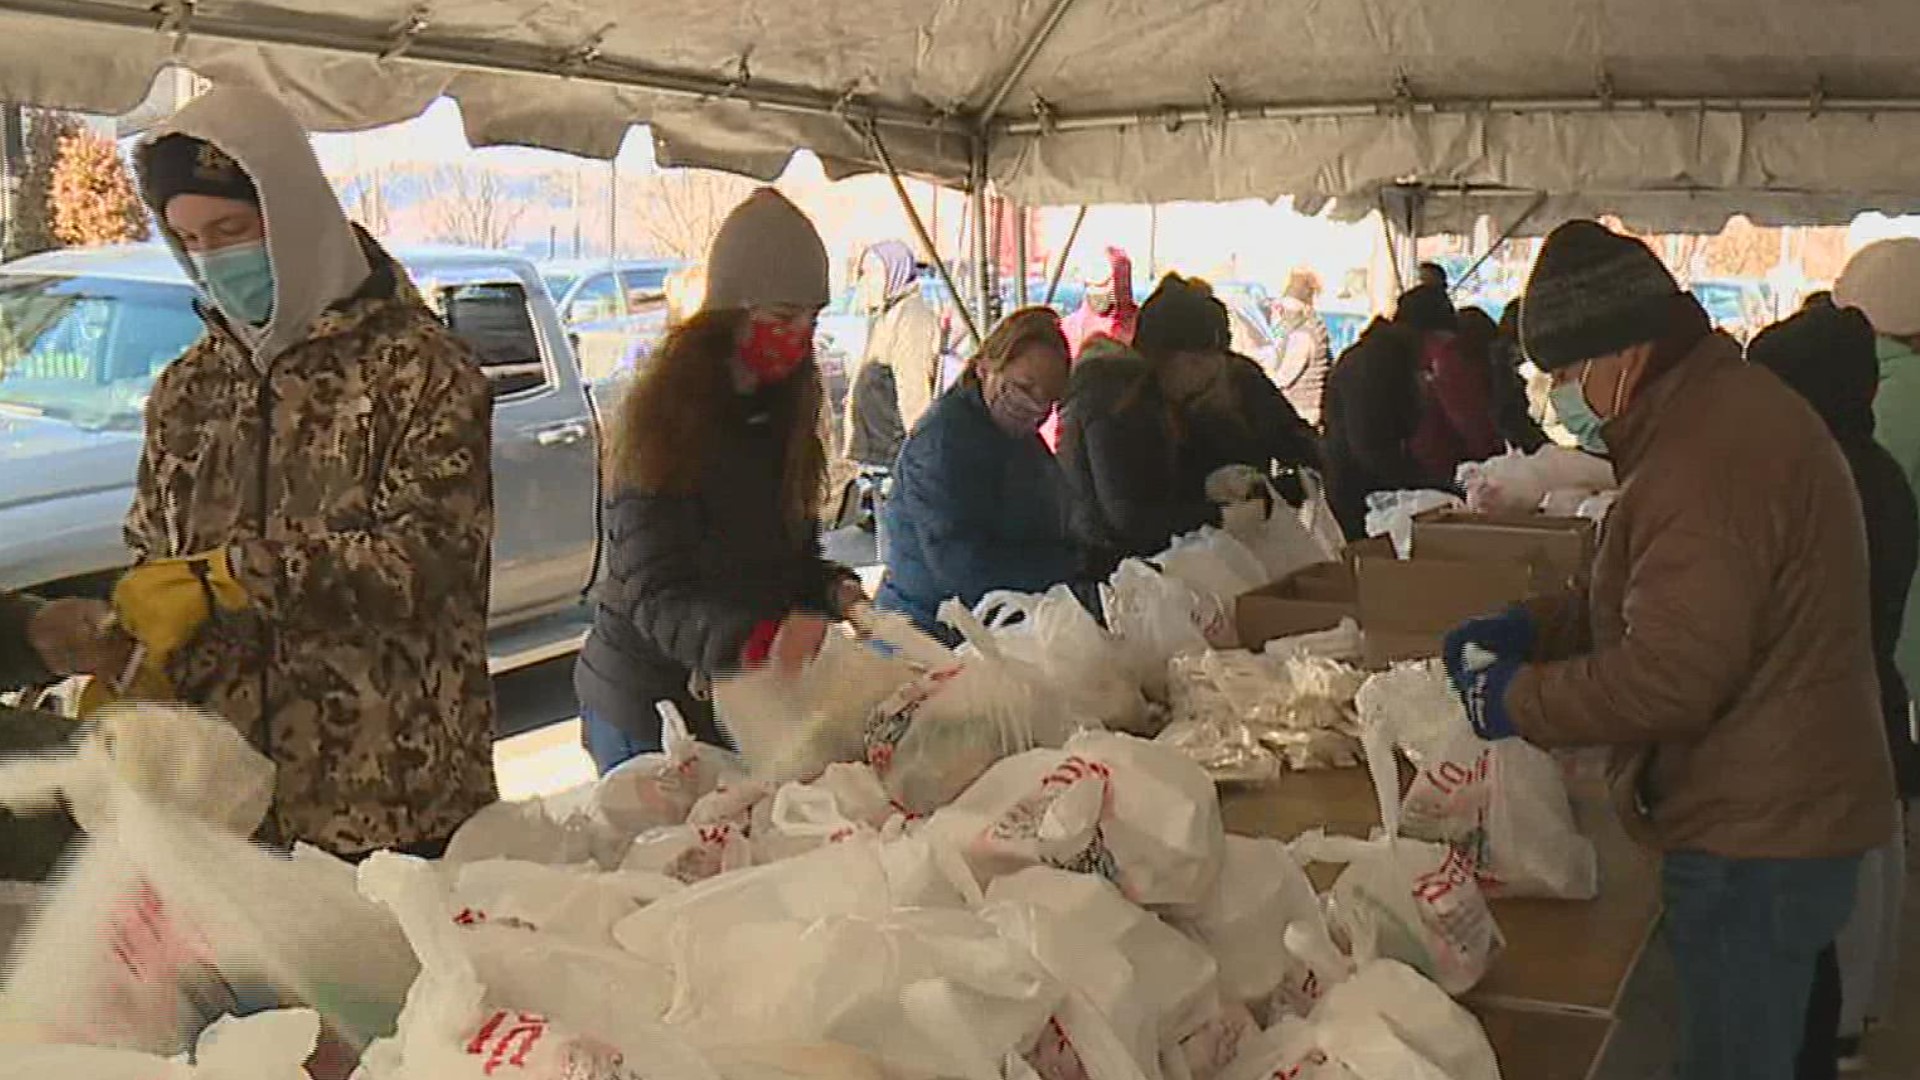 Volunteers in Lackawanna County are making sure thousands have a good Thanksgiving dinner.